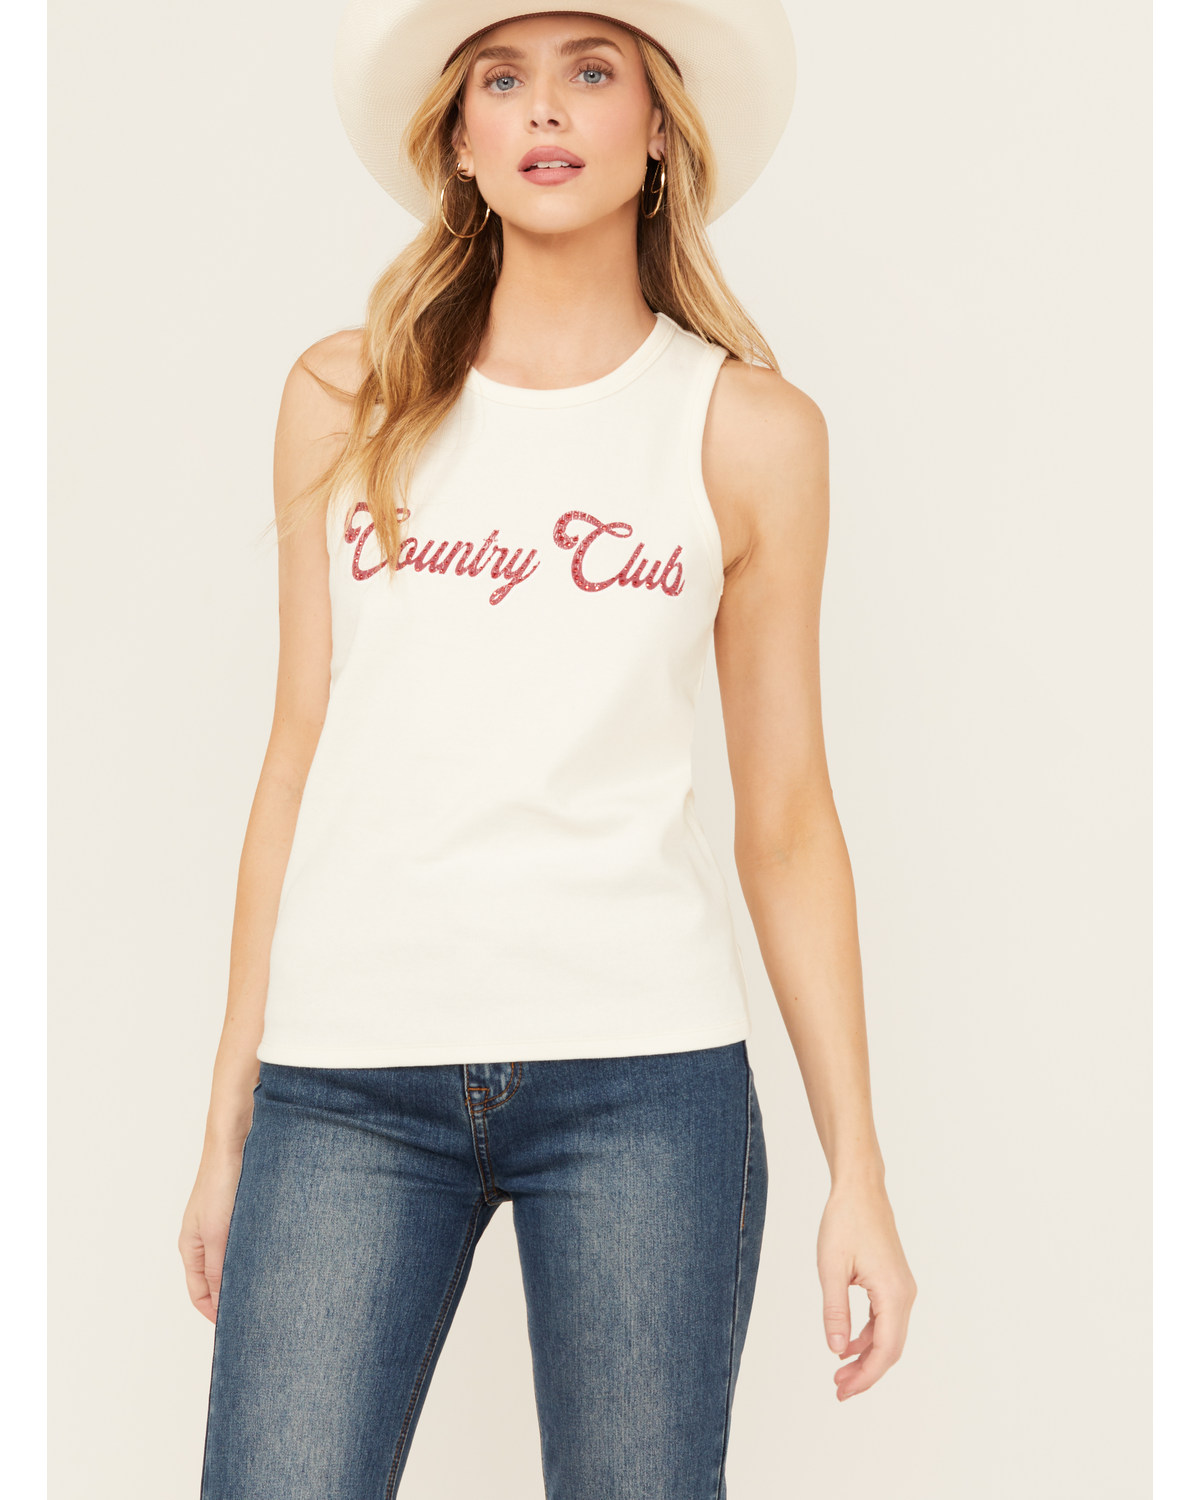 Blended Women's Rhinestone Country Club Graphic Tank